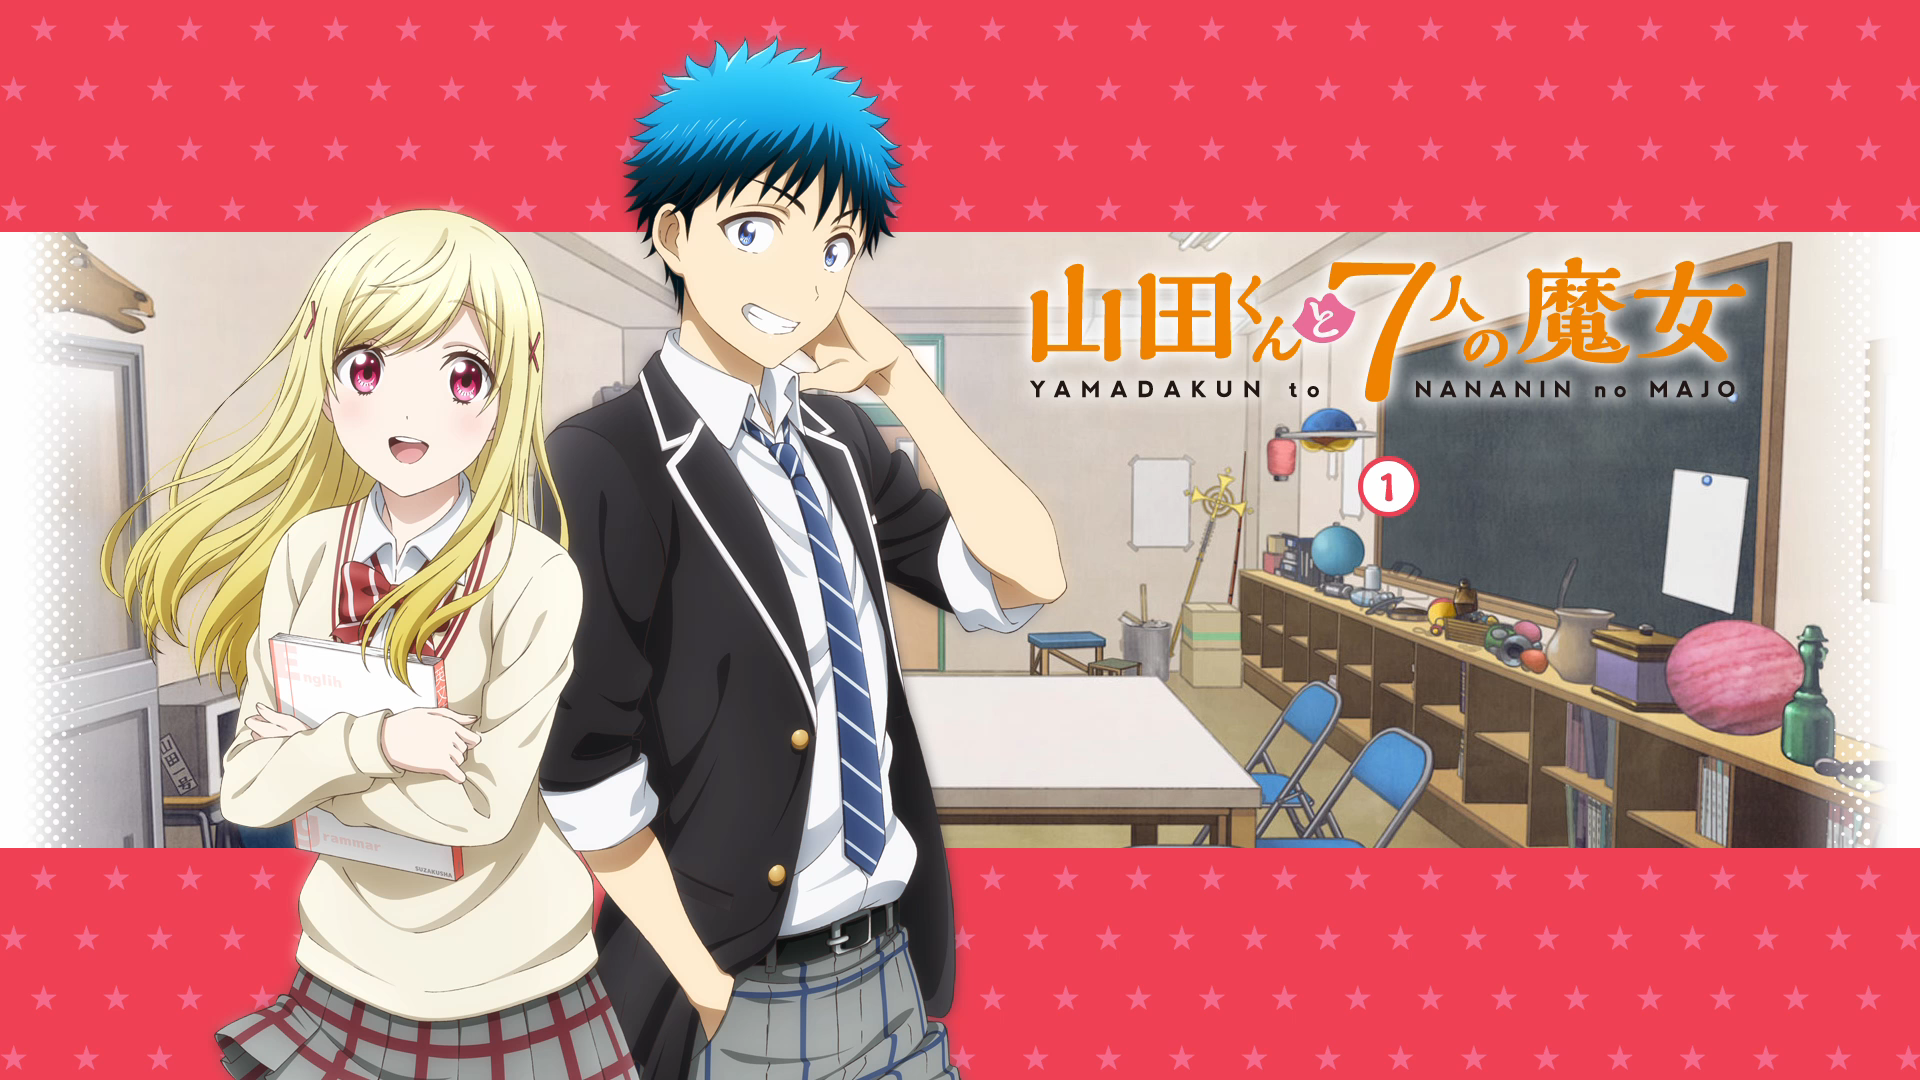 Anime Yamada-kun and the Seven Witches HD Wallpaper